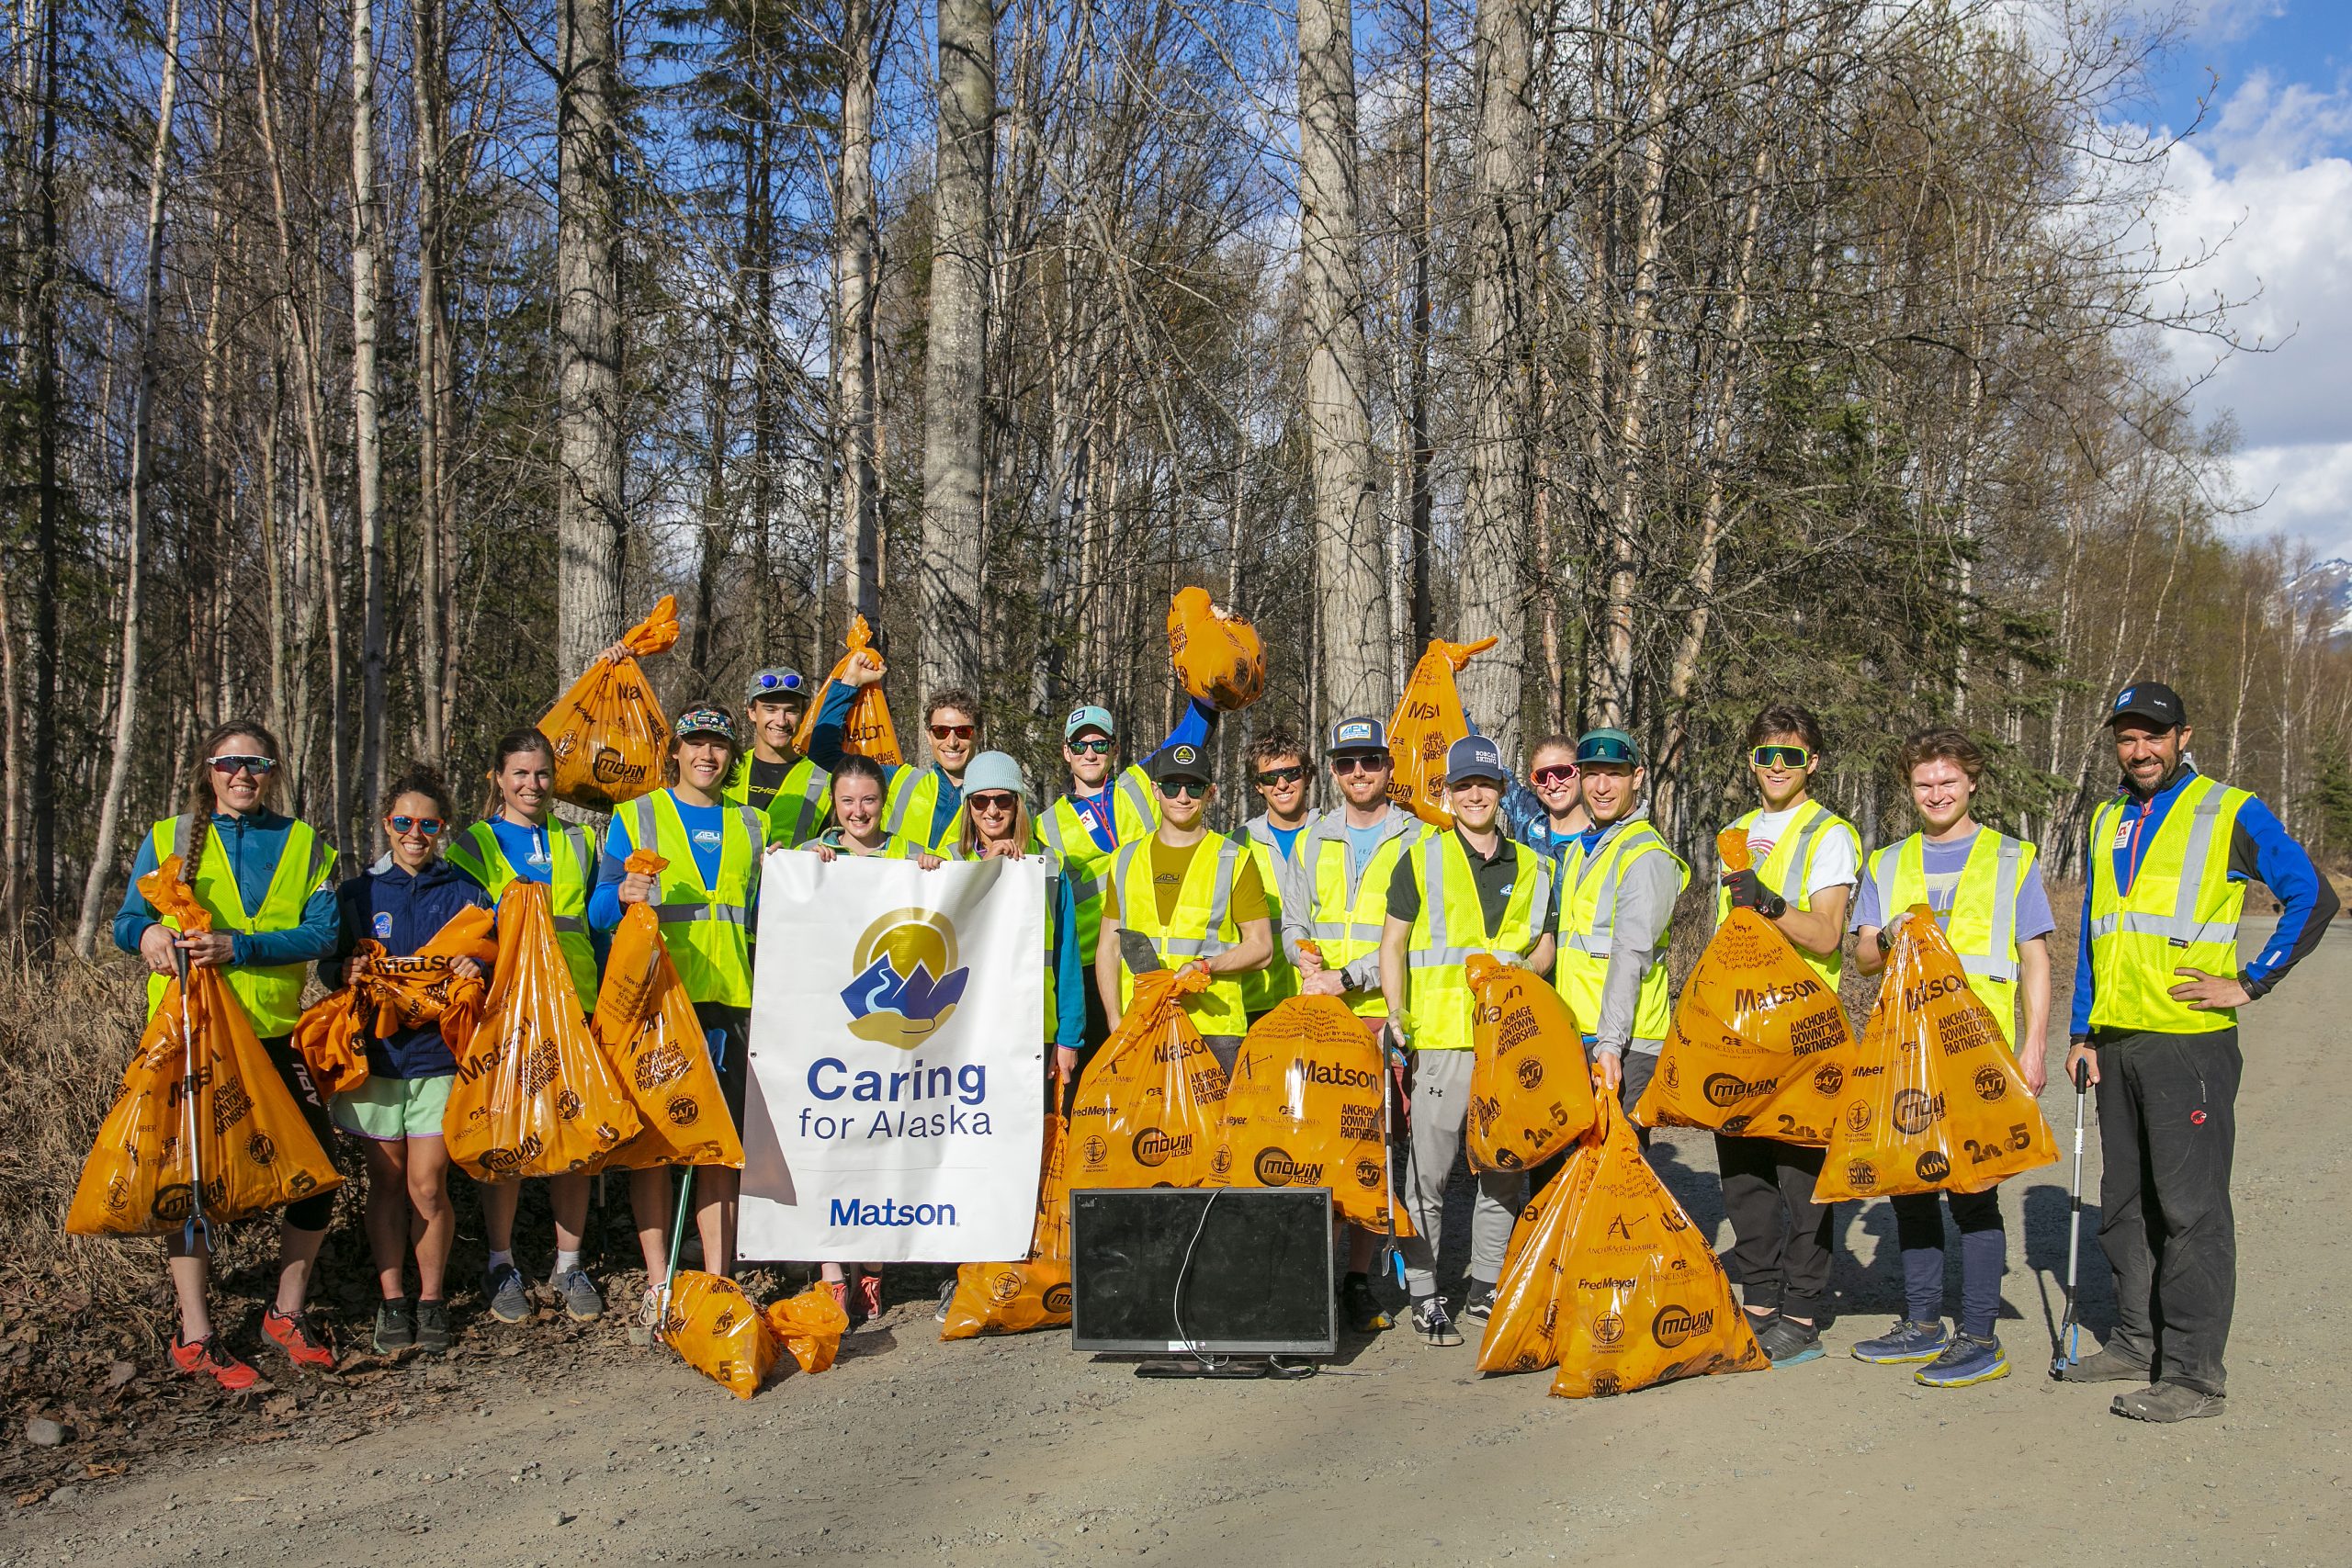 Volunteers wearing yellow safety vests pose for a group picture with their full orange trash bags and Caring For Alaska banner.